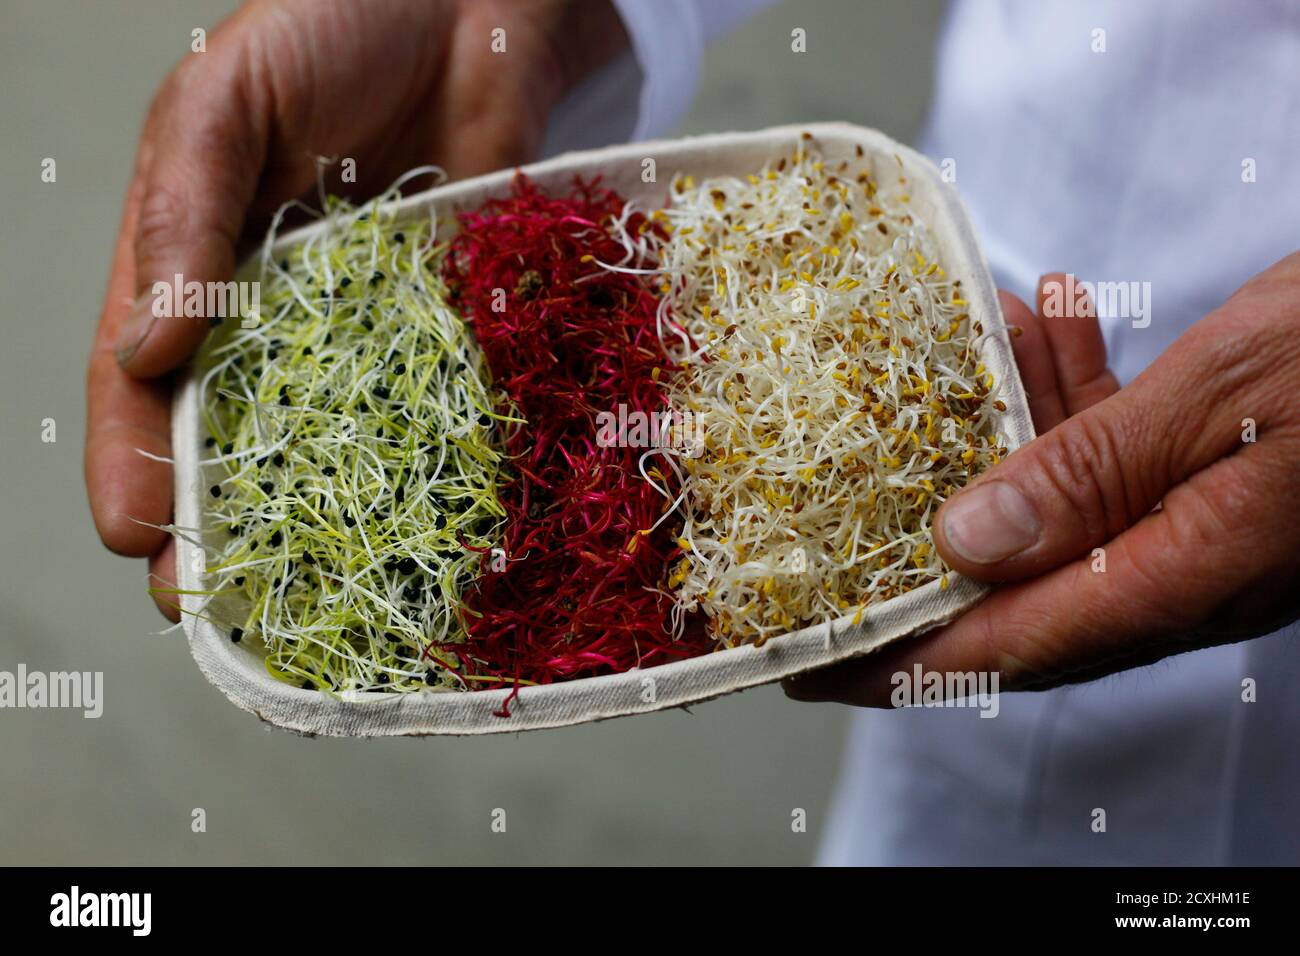 Bean and salad sprouts are pictured at Berlin's sprouts manufacturer 'Sprossenmanufaktur' in Berlin June 6, 2011. The managing director of a German organic farm near Hanover that might be at the centre of a deadly E.coli outbreak said on Monday he was baffled that his beansprouts are suspected of causing such devastation. German officials said on Sunday the beansprouts of Klaus Verbeck, the head of the 'Gaertnerhof Bienenbuettel', could be the source of the EHEC bacteria (enterohaemorrhagic Escherichia coli) outbreak that has killed 22 and made more than 2,200 people ill across Europe. The far Stock Photo